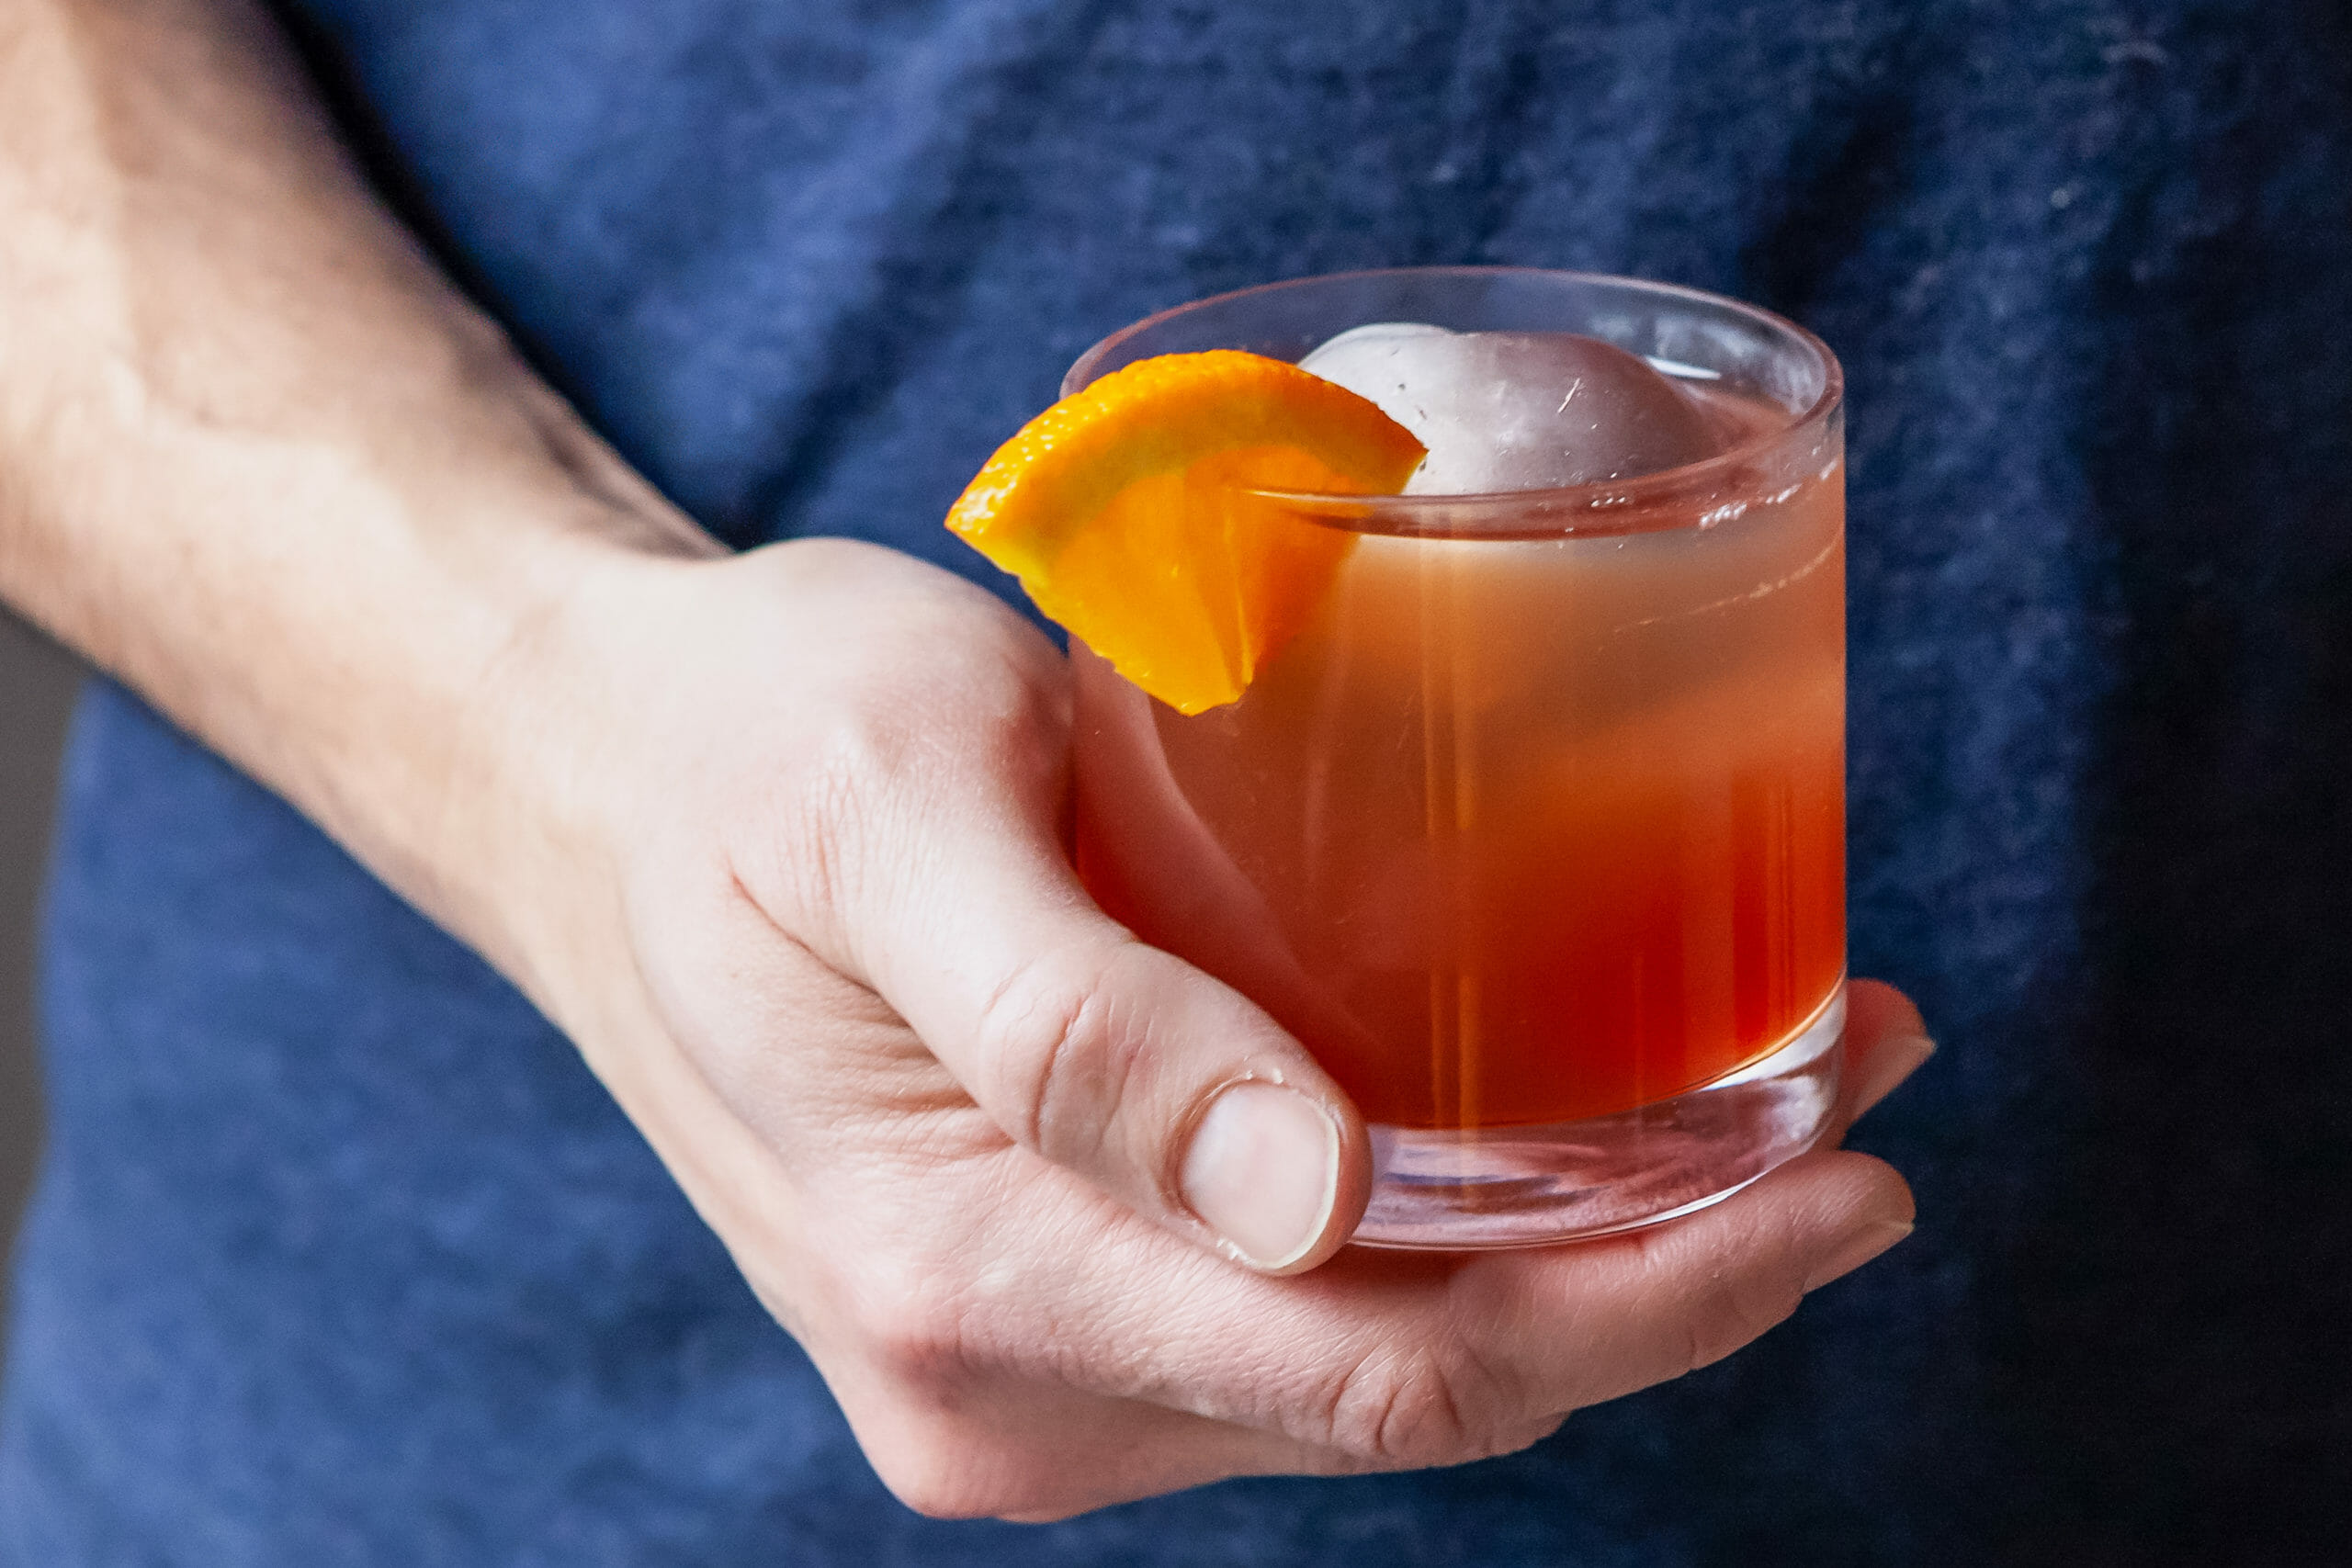 A person holding an Alcohol free negroni.